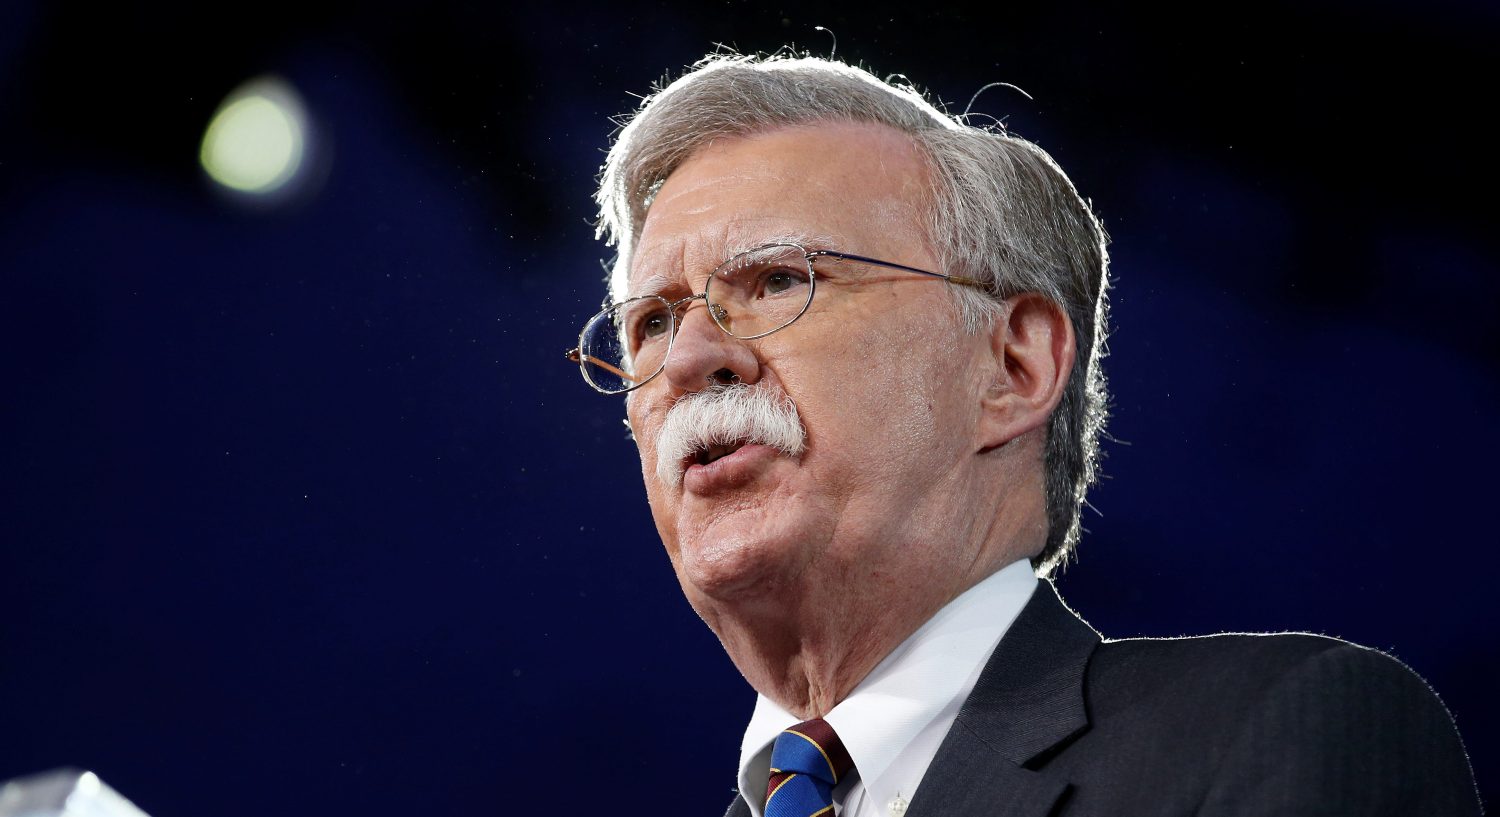 Former U.S. Ambassador to the United Nations John Bolton speaks at the Conservative Political Action Conference (CPAC) in Oxon Hill, Maryland, U.S. February 24, 2017. REUTERS/Joshua Roberts - RC1843BD8B50